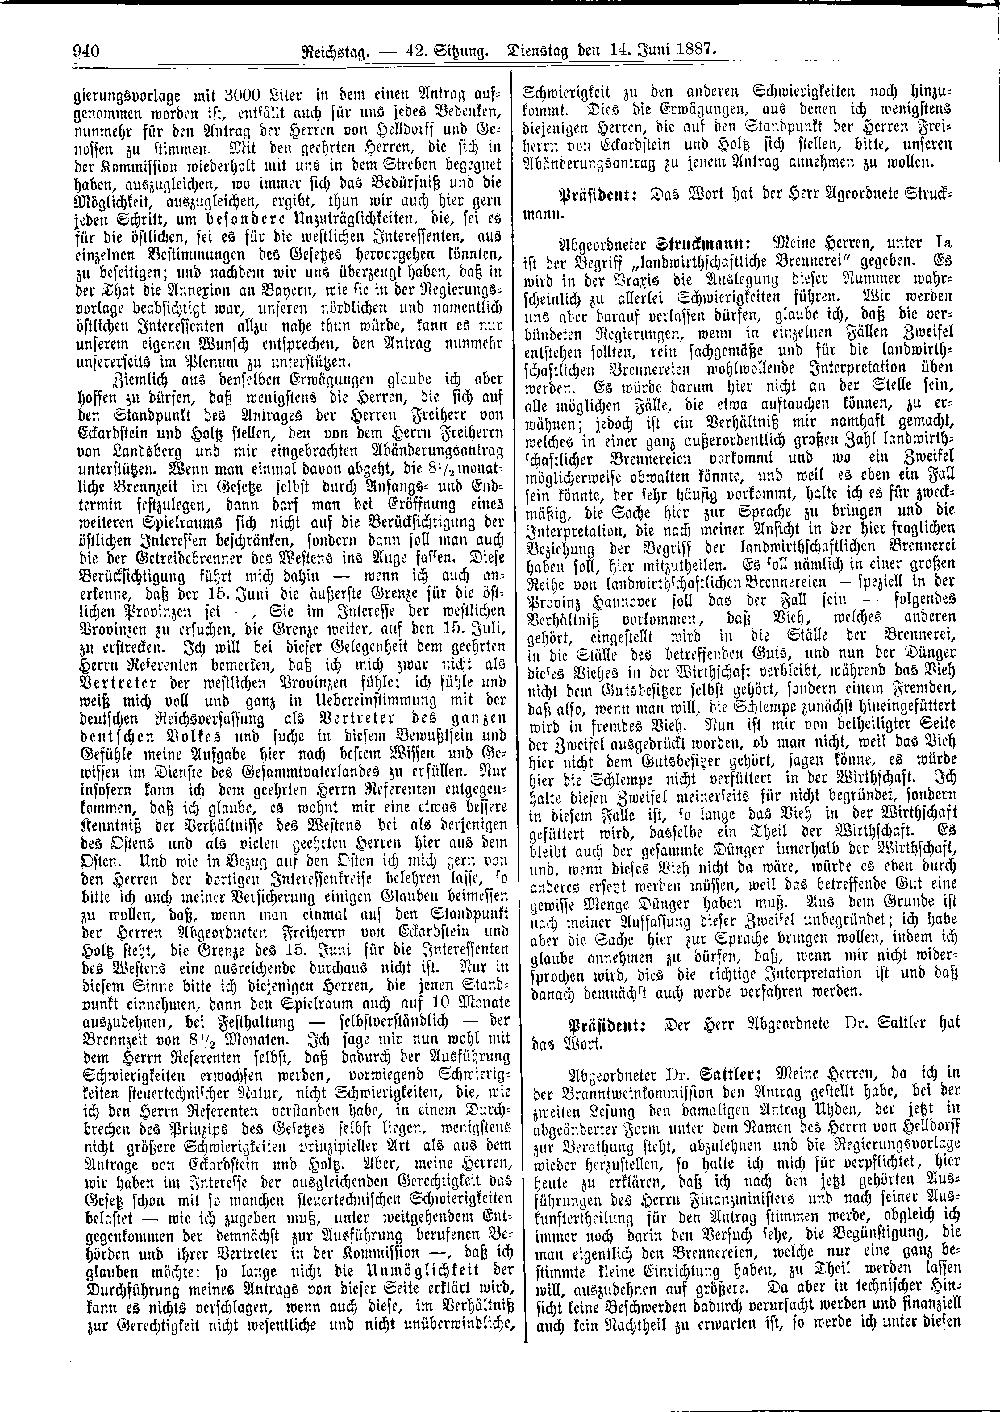 Scan of page 940